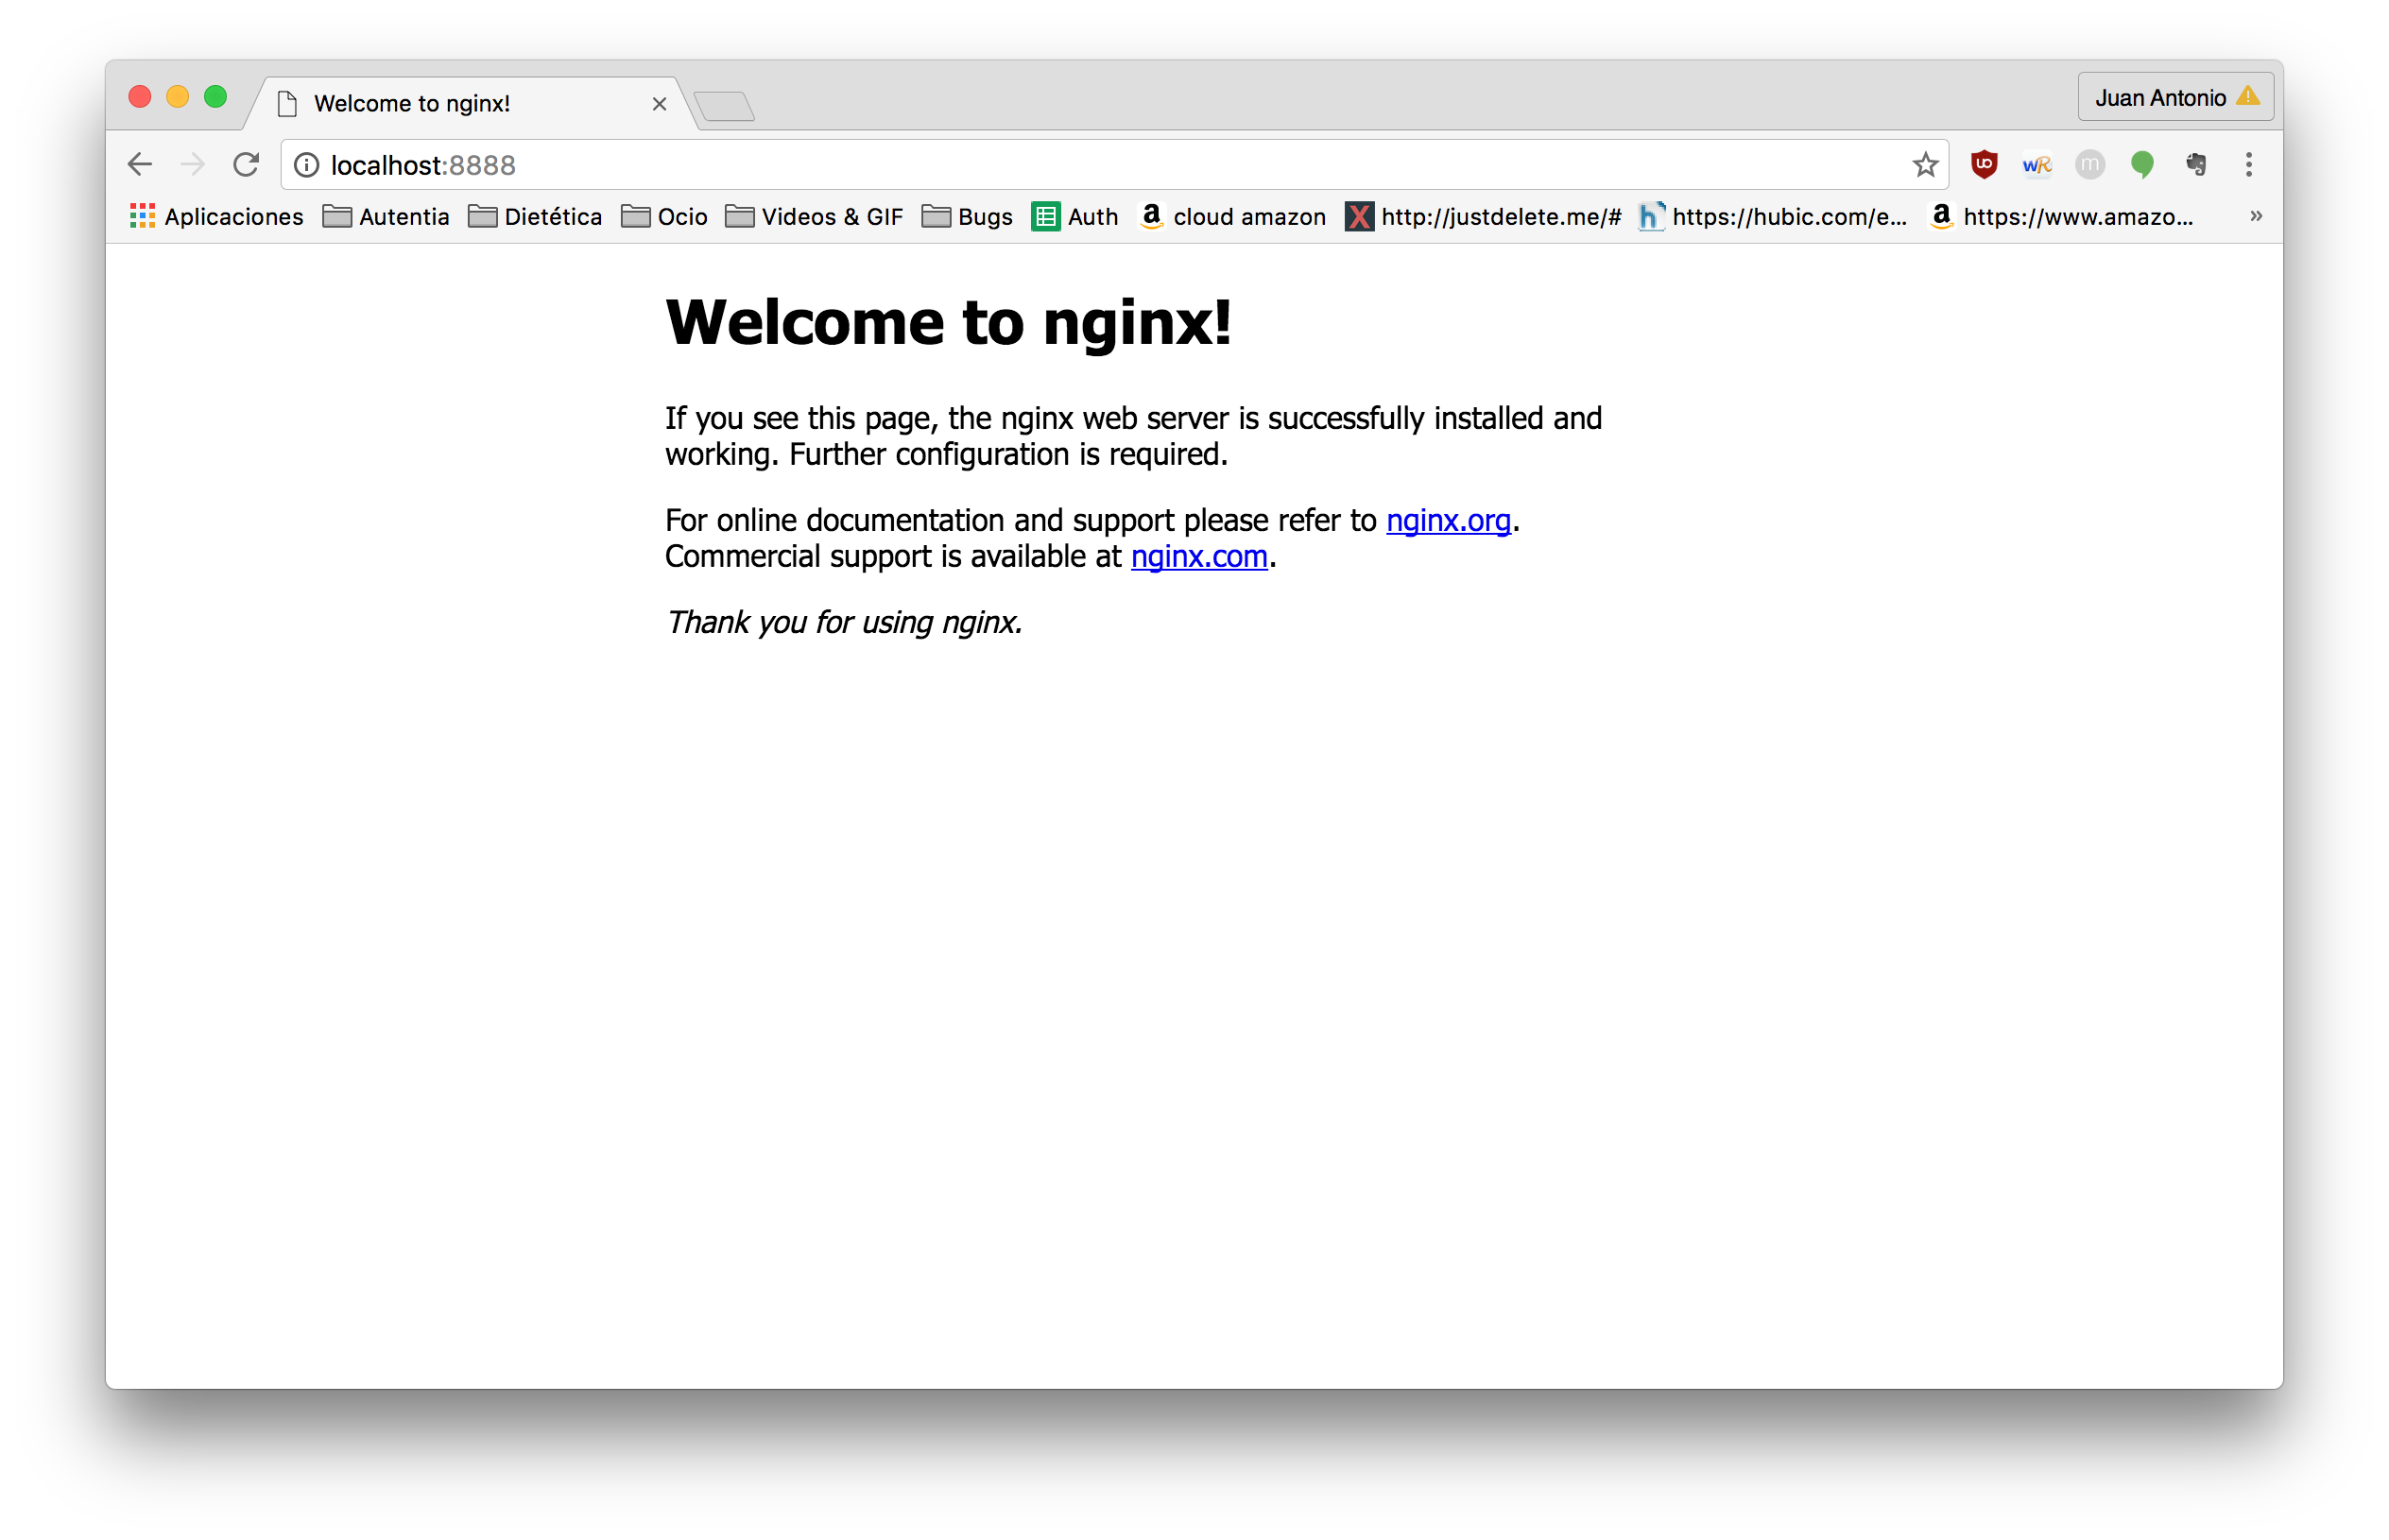 Default image from Nginx